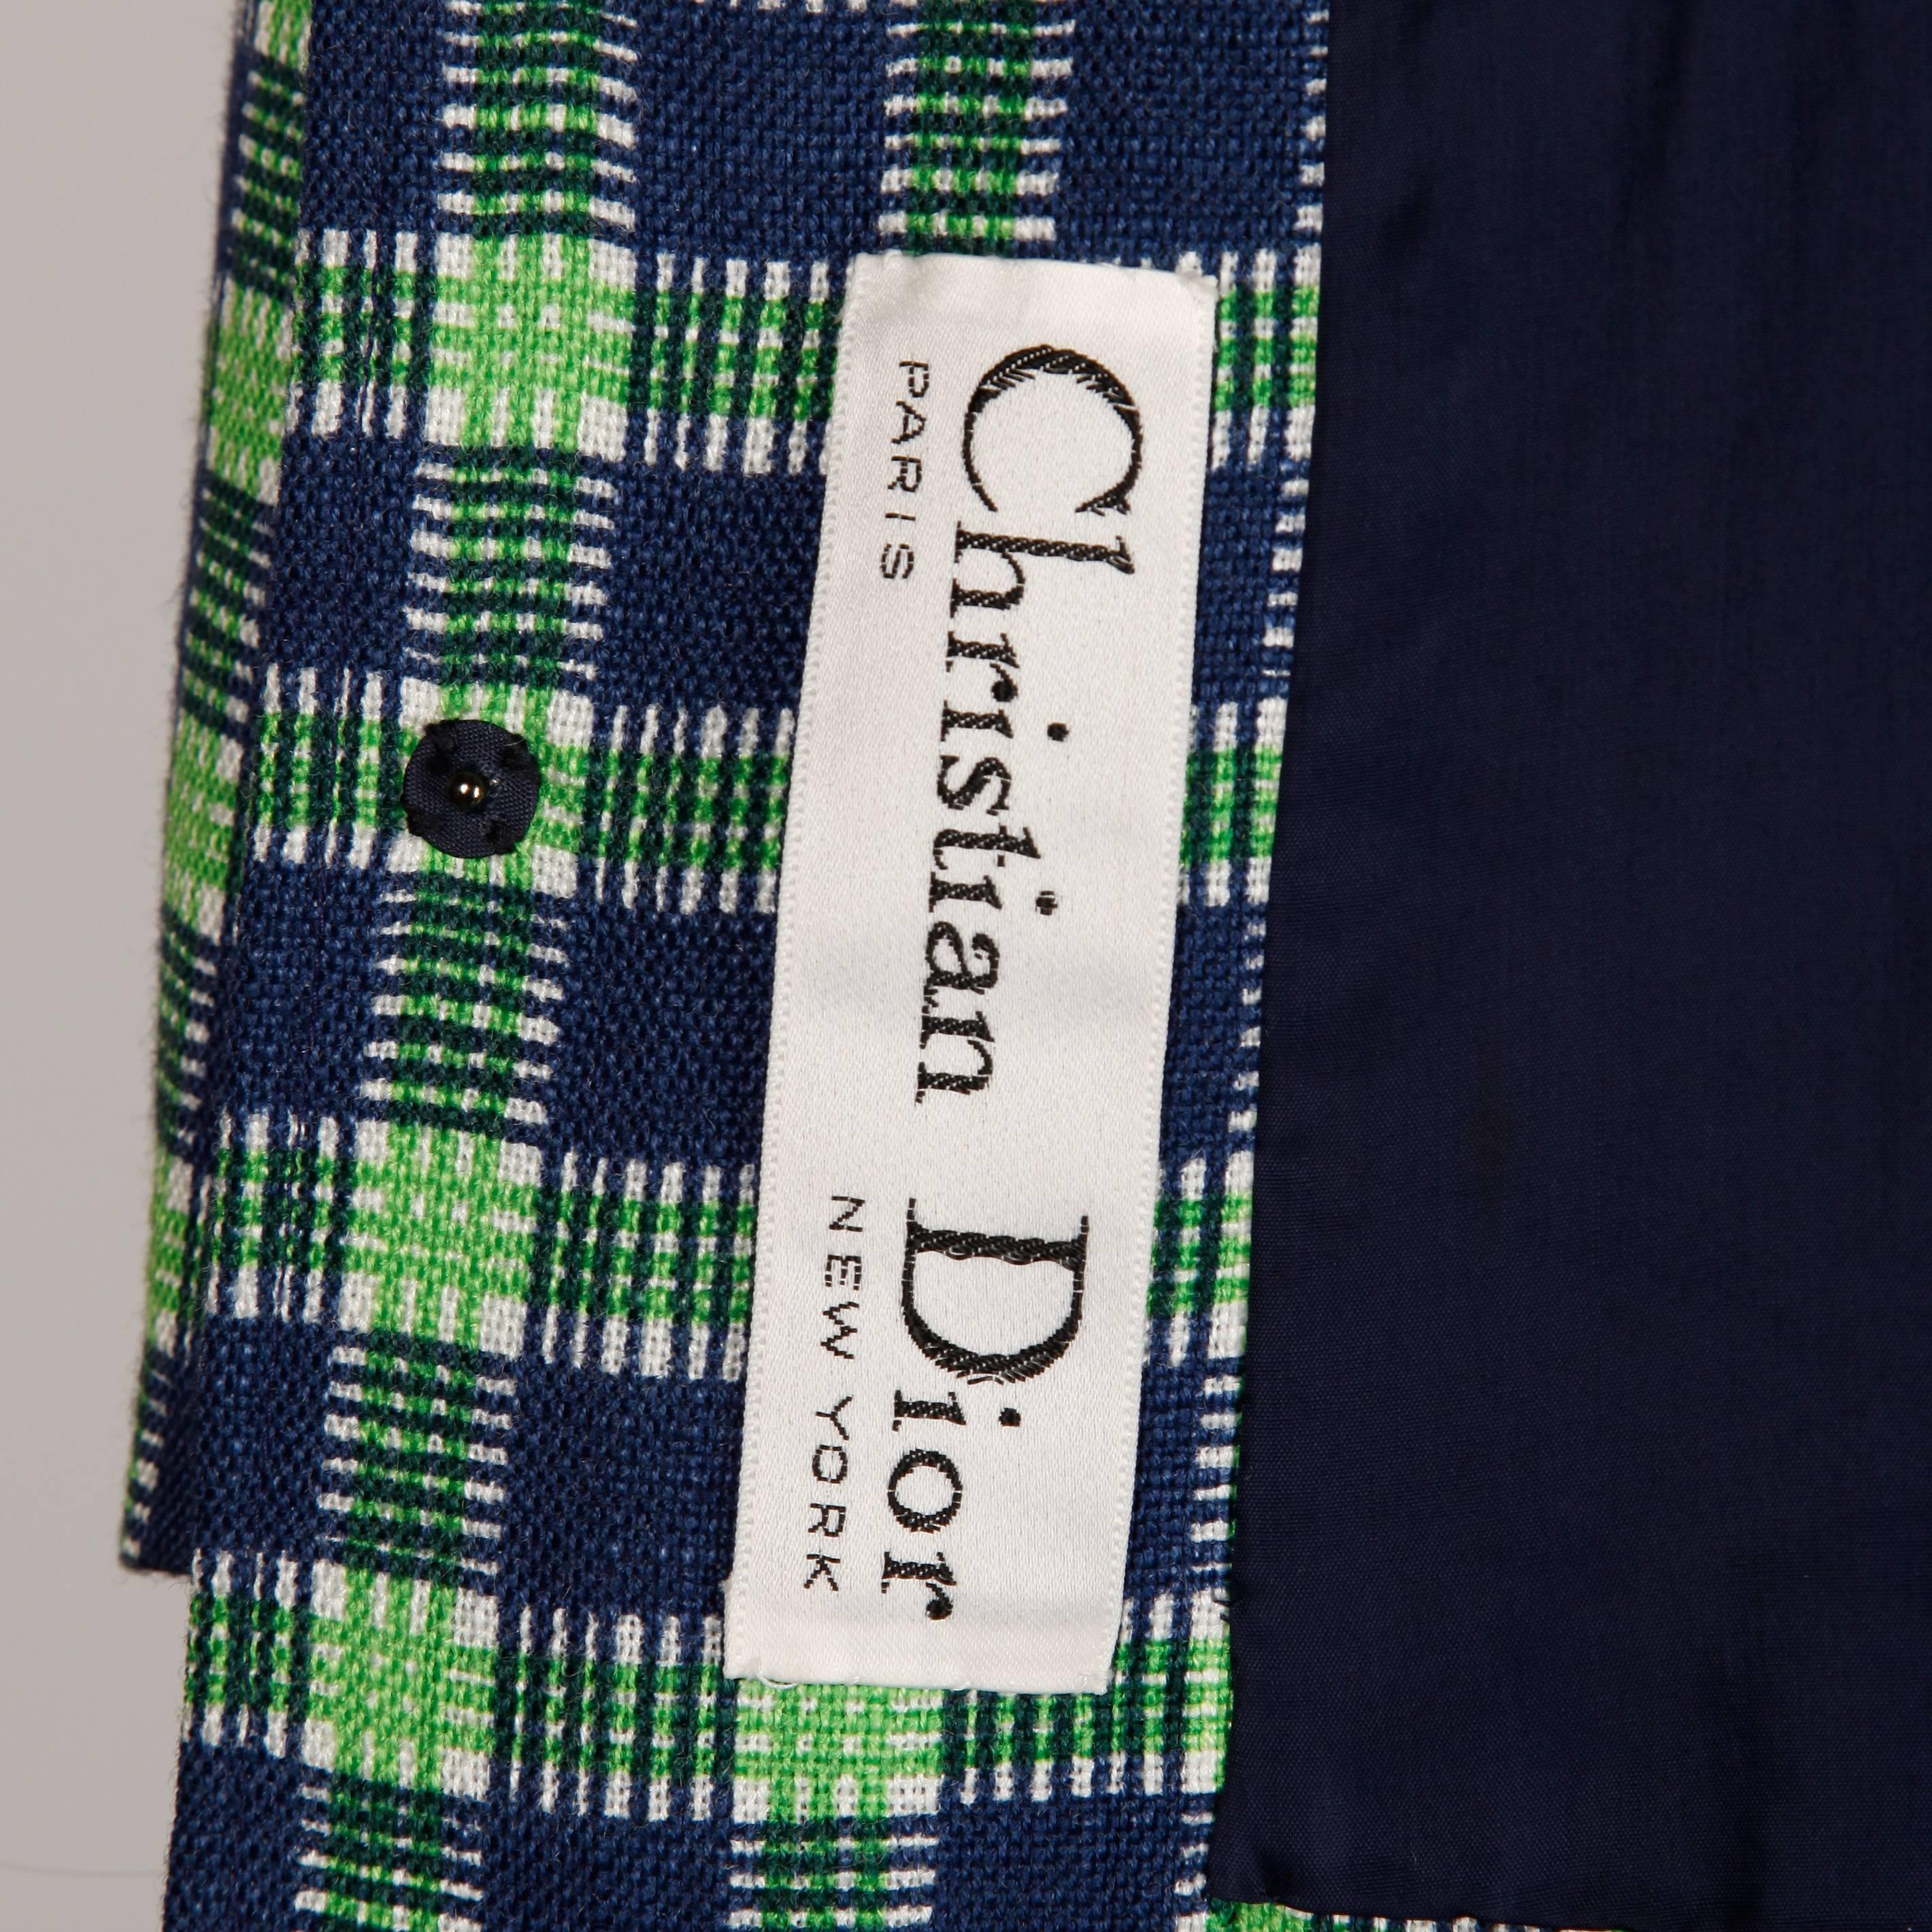 Rare 1970s Dior! Green and navy blue plaid wool double breasted jacket and skirt ensemble. Fully lined. Button and snap closure on the jacket and zip and hook closure on the skirt. The marked size is a vintage 10 and the suit fits like a modern size